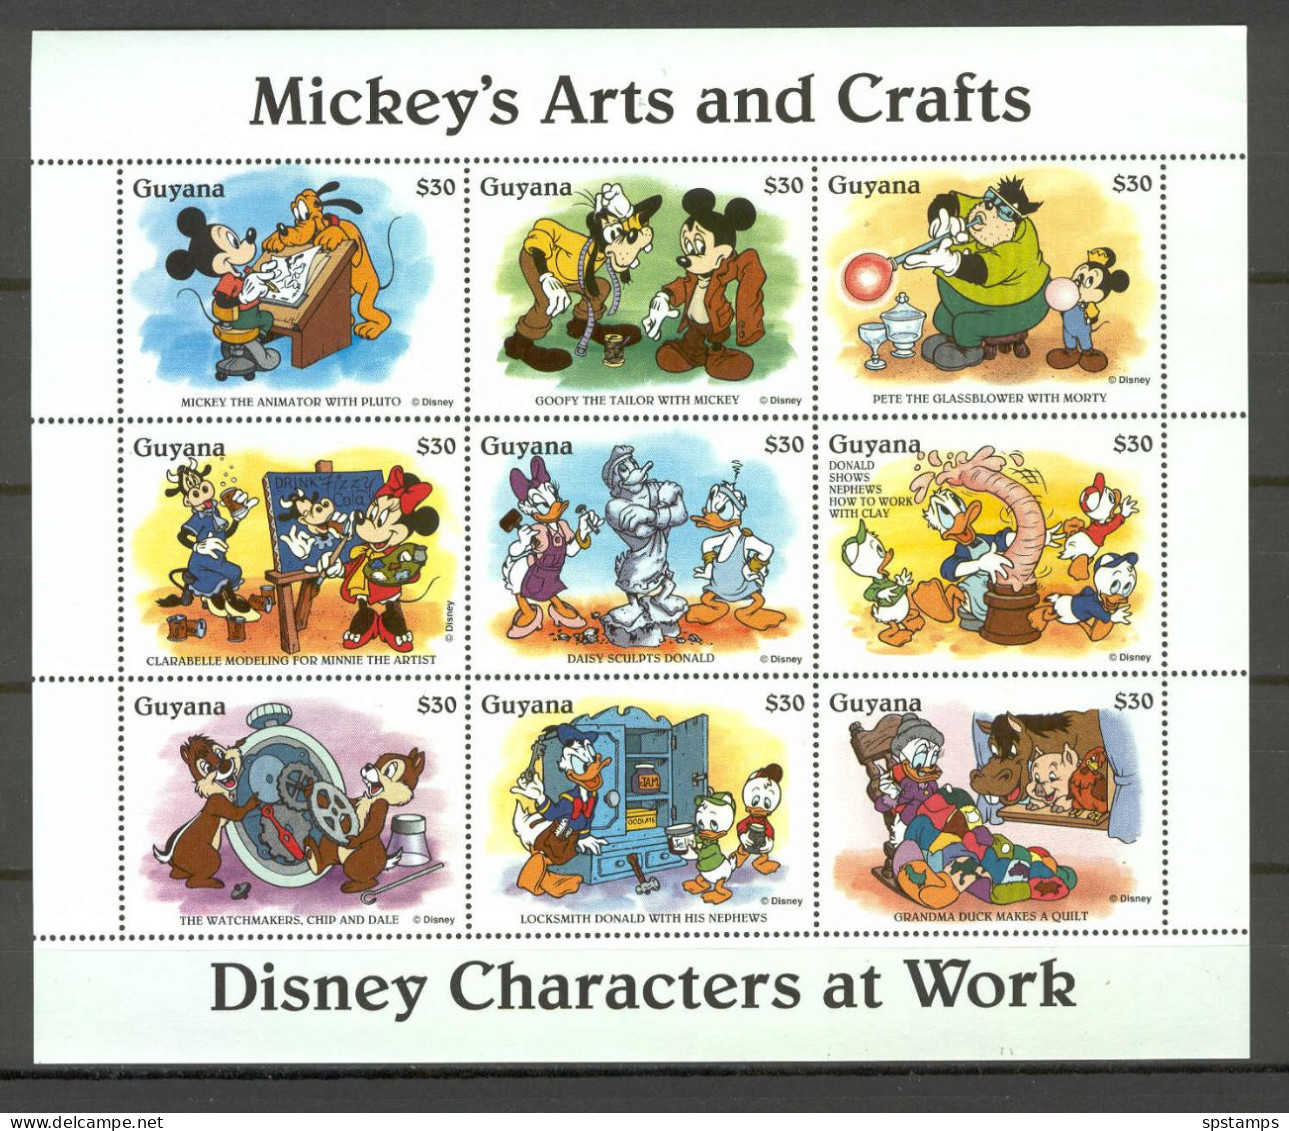 Disney Guyana 1995 Mickey's Arts And Crafts Sheetlet (WITHOUT LABEL) MNH - Disney